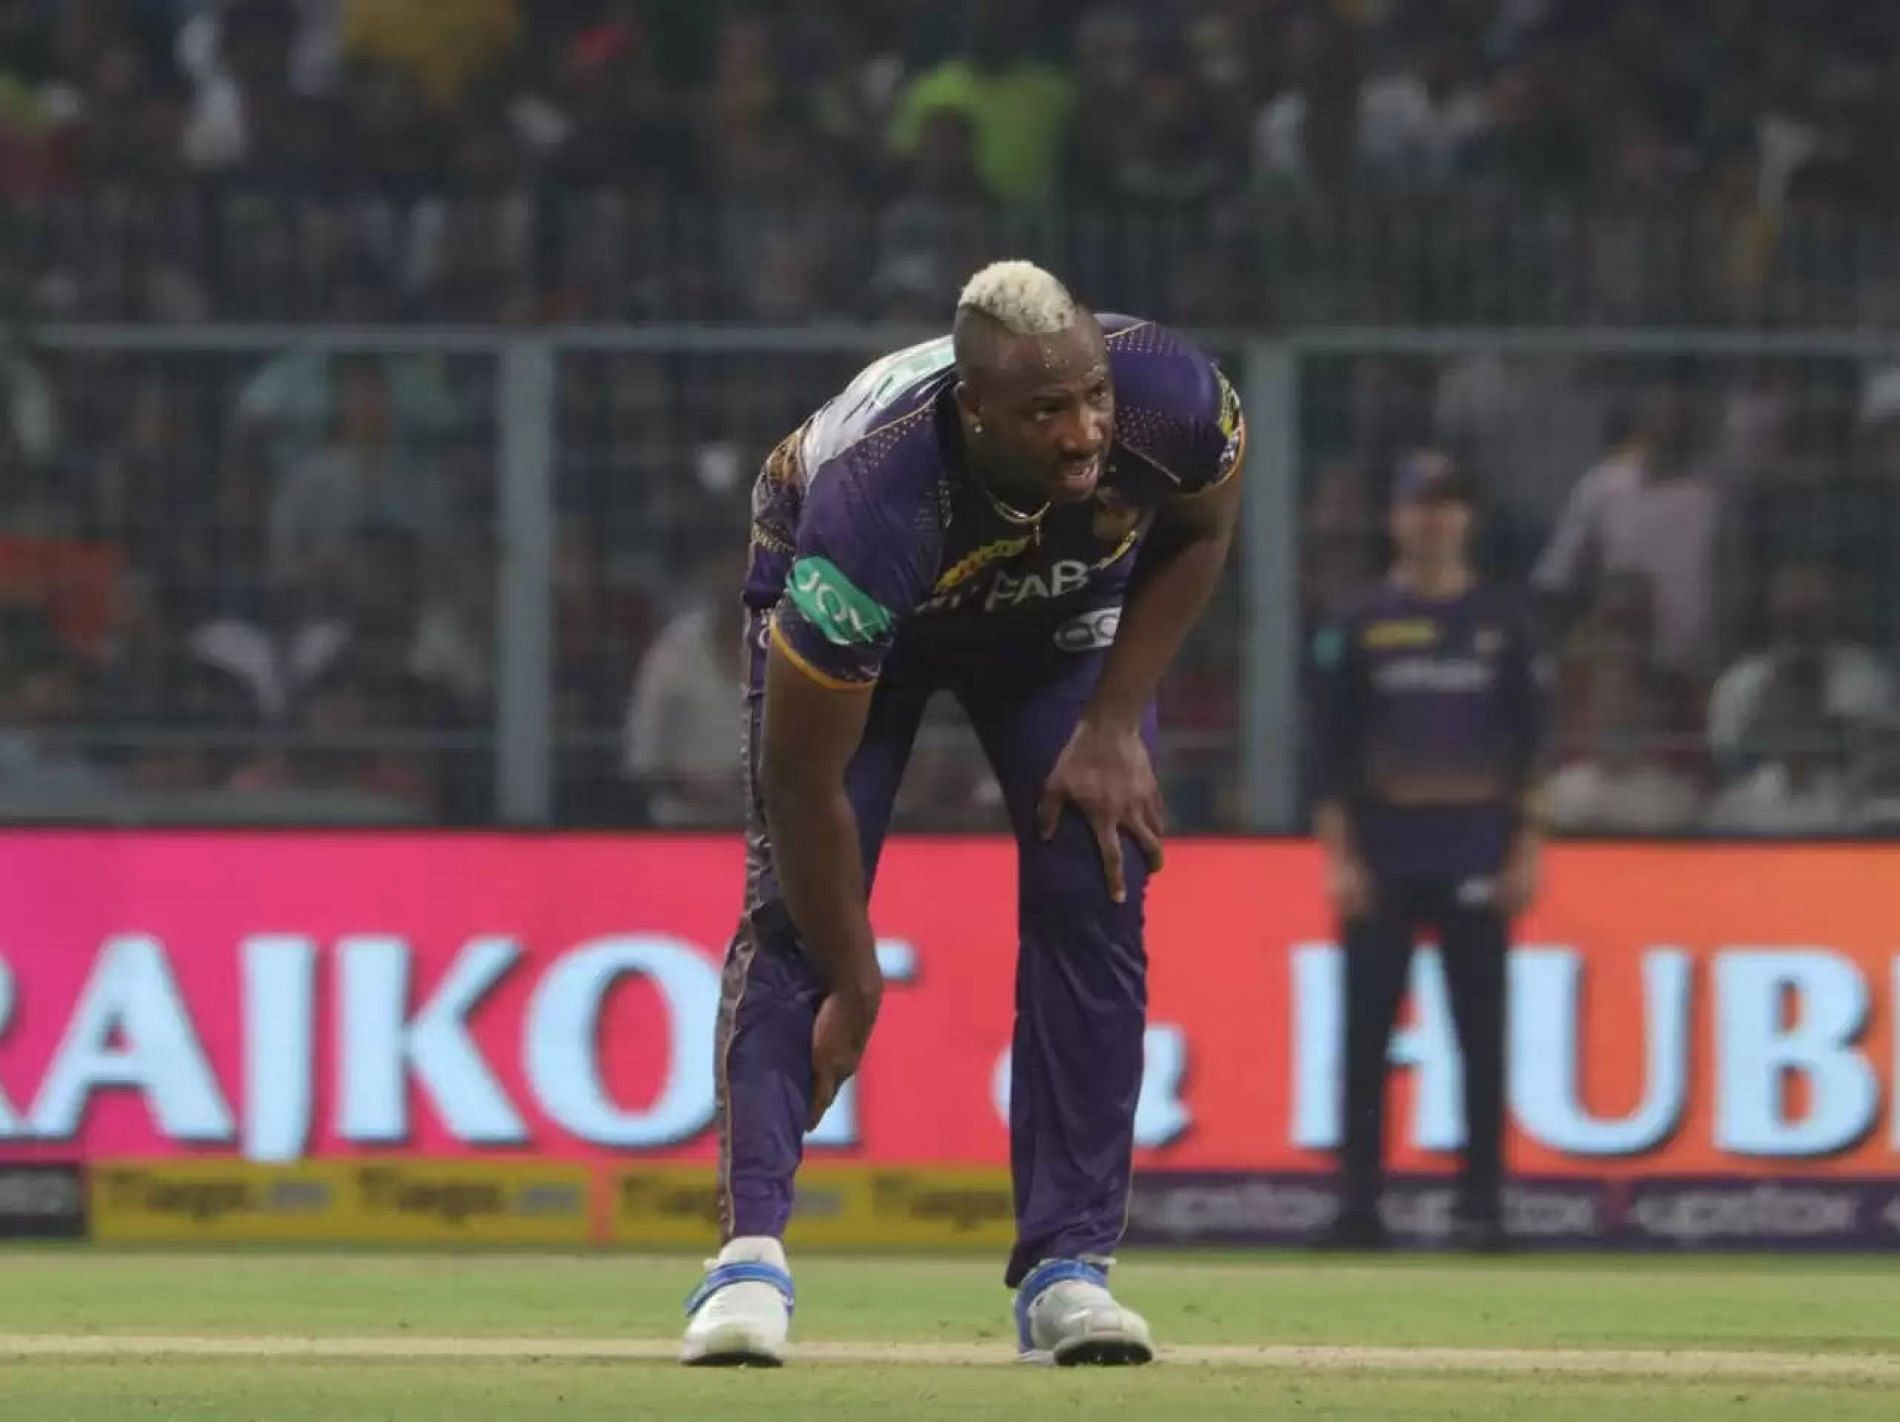 Andre Russell has had a miserable IPL with bat and ball so far